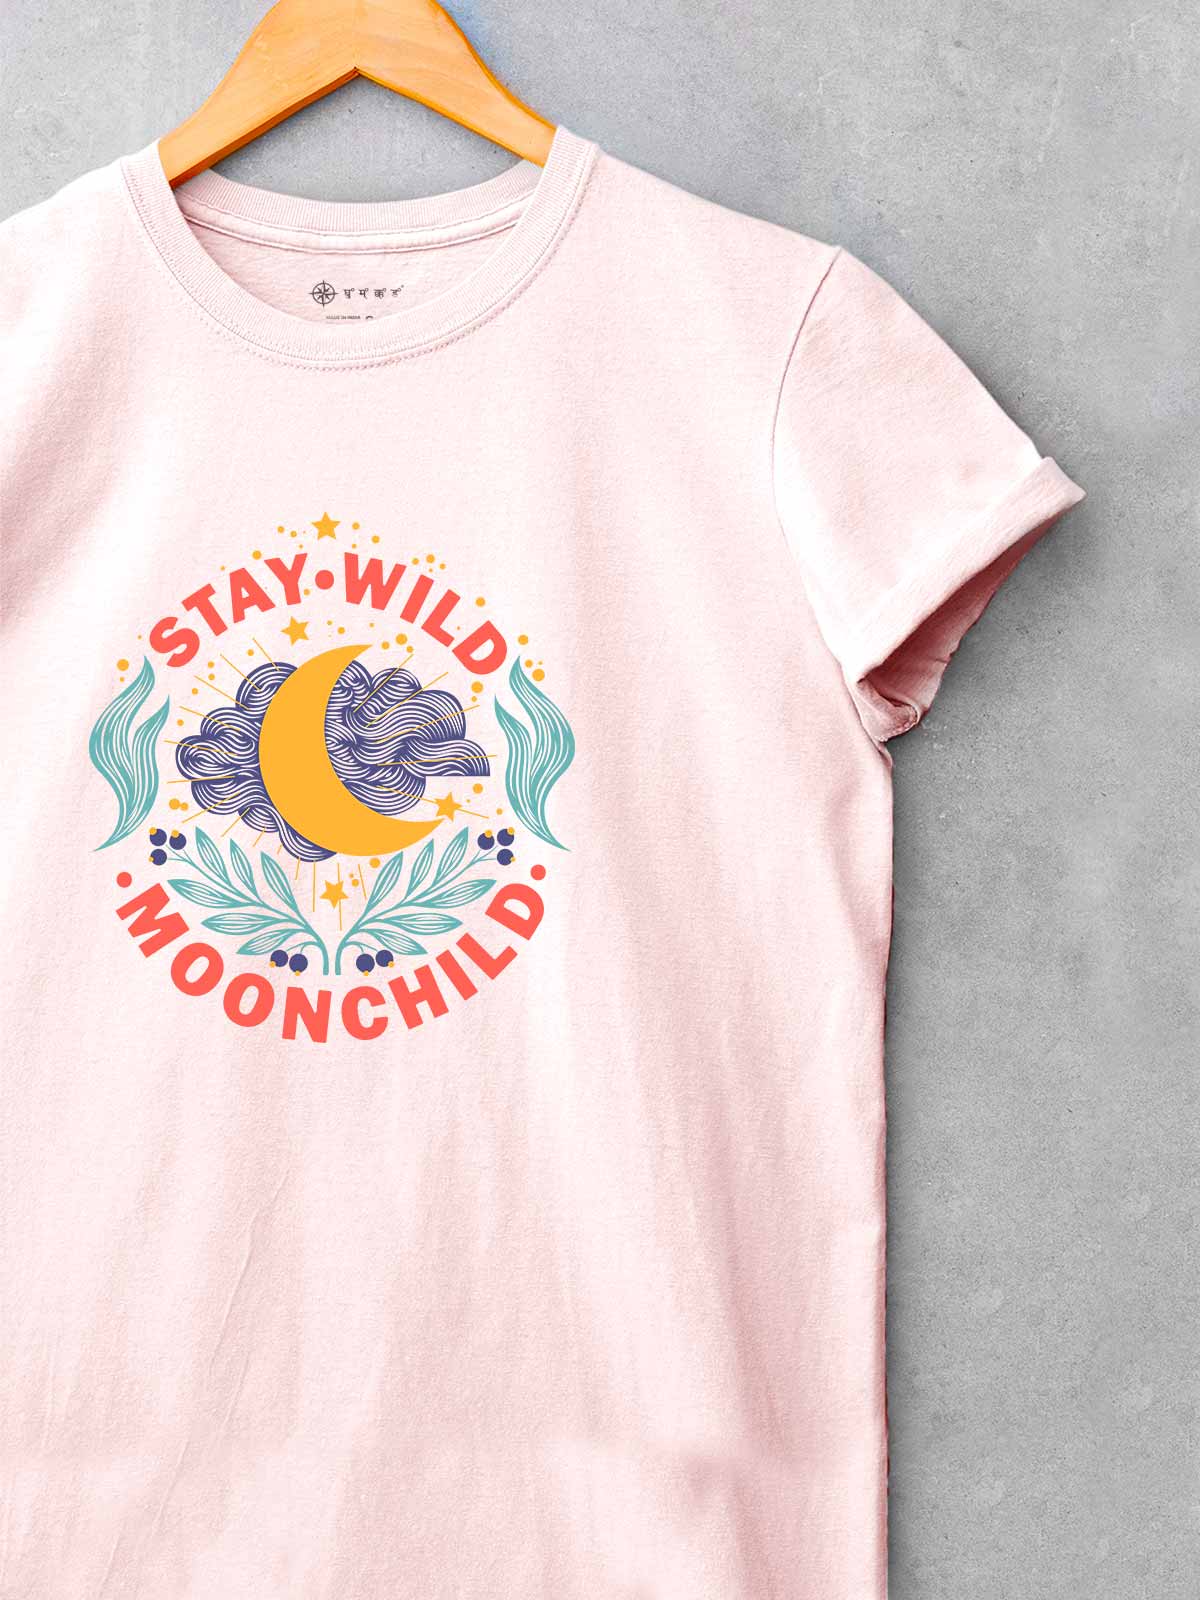 Moonchild-printed-t-shirt-for-women by Ghumakkad